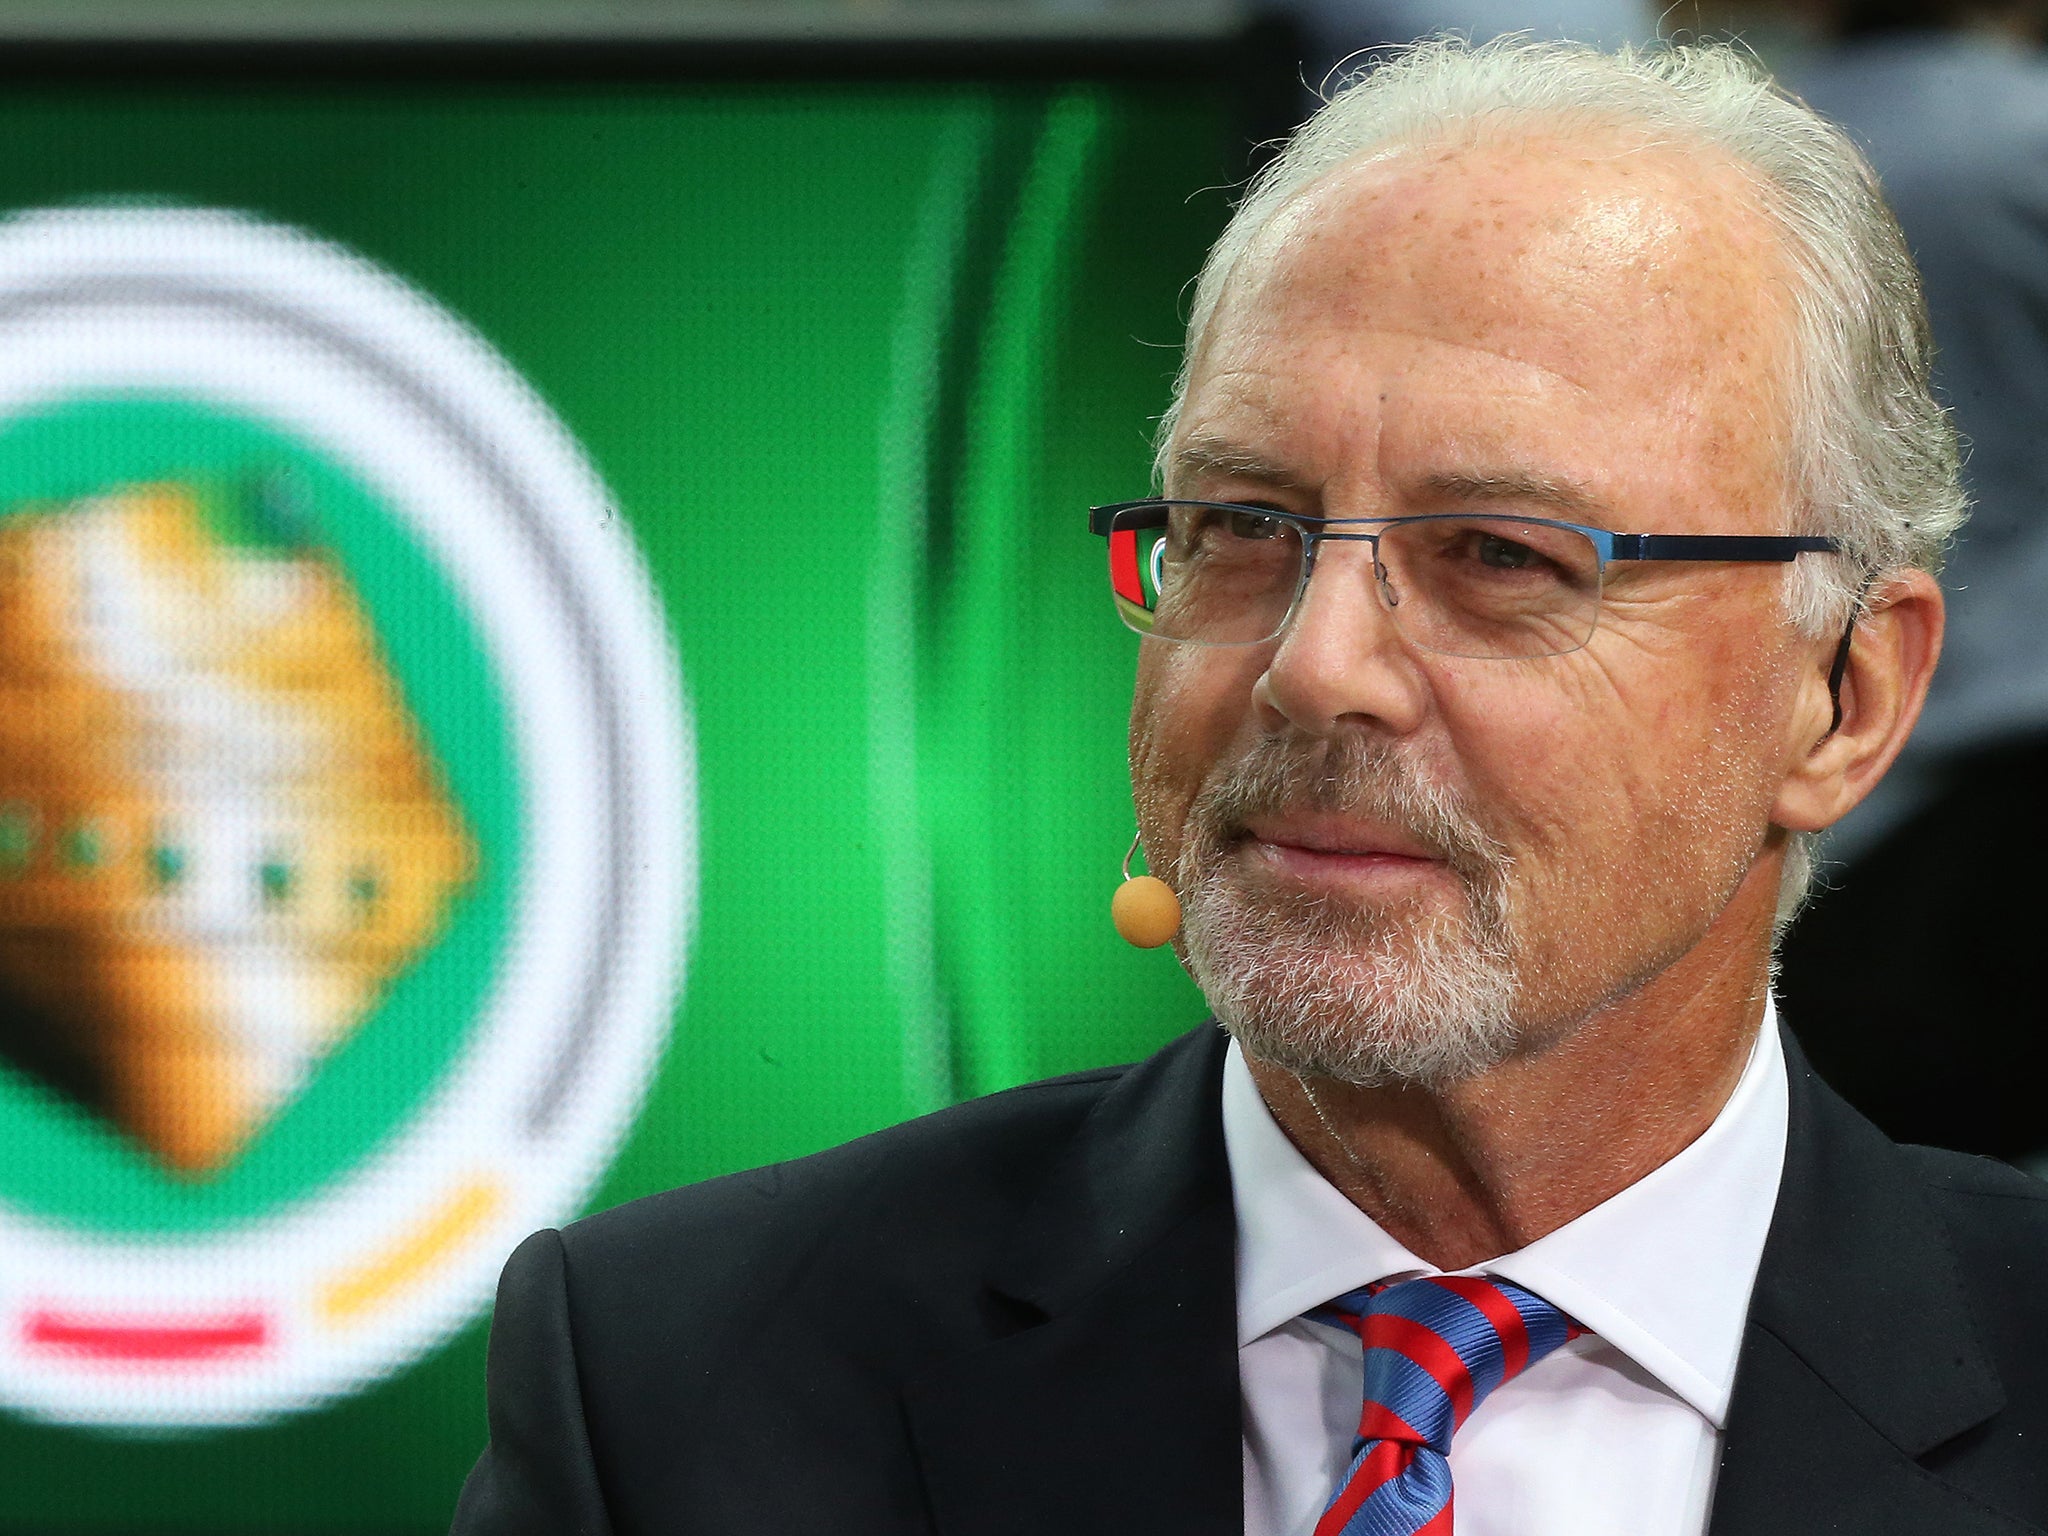 Franz Beckenbauer was provisionally banned by FIFA after allegedly failing to co-operate with Michael Garcia's corruption probe